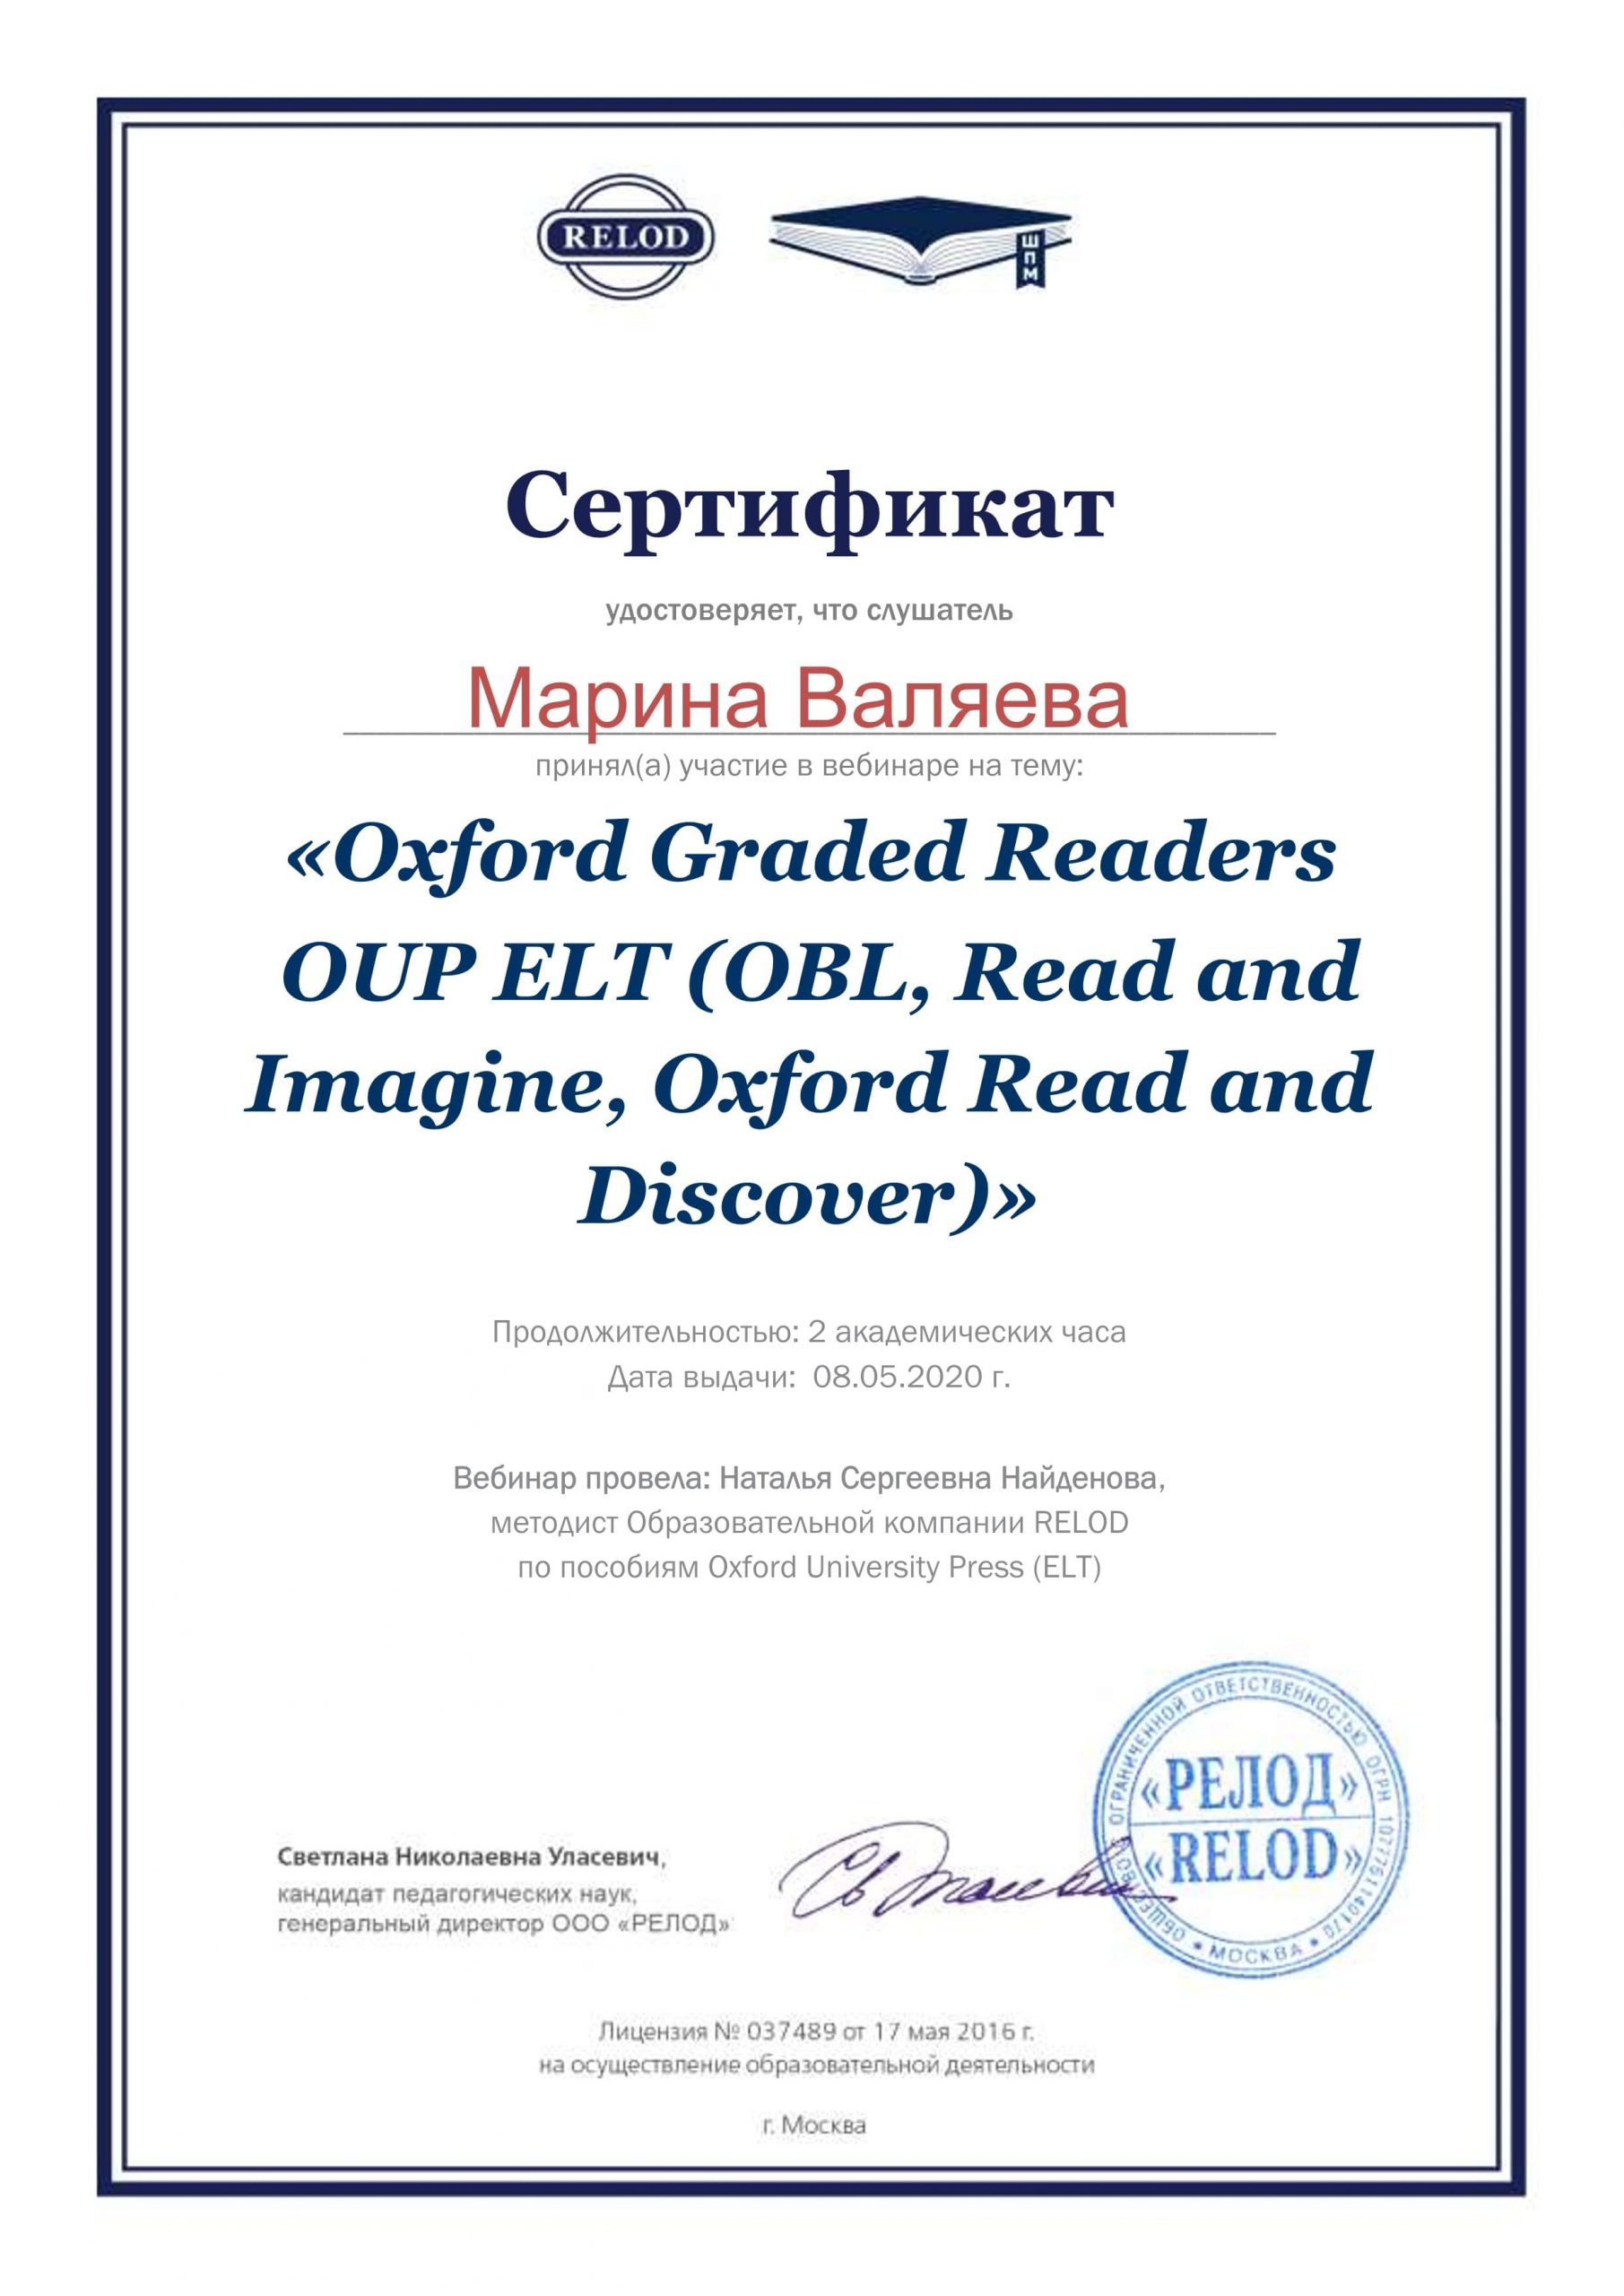 Certificate Oxford Graded Readers OUP ELT (OBL, Read and Imagine, Oxford Read and Discover)